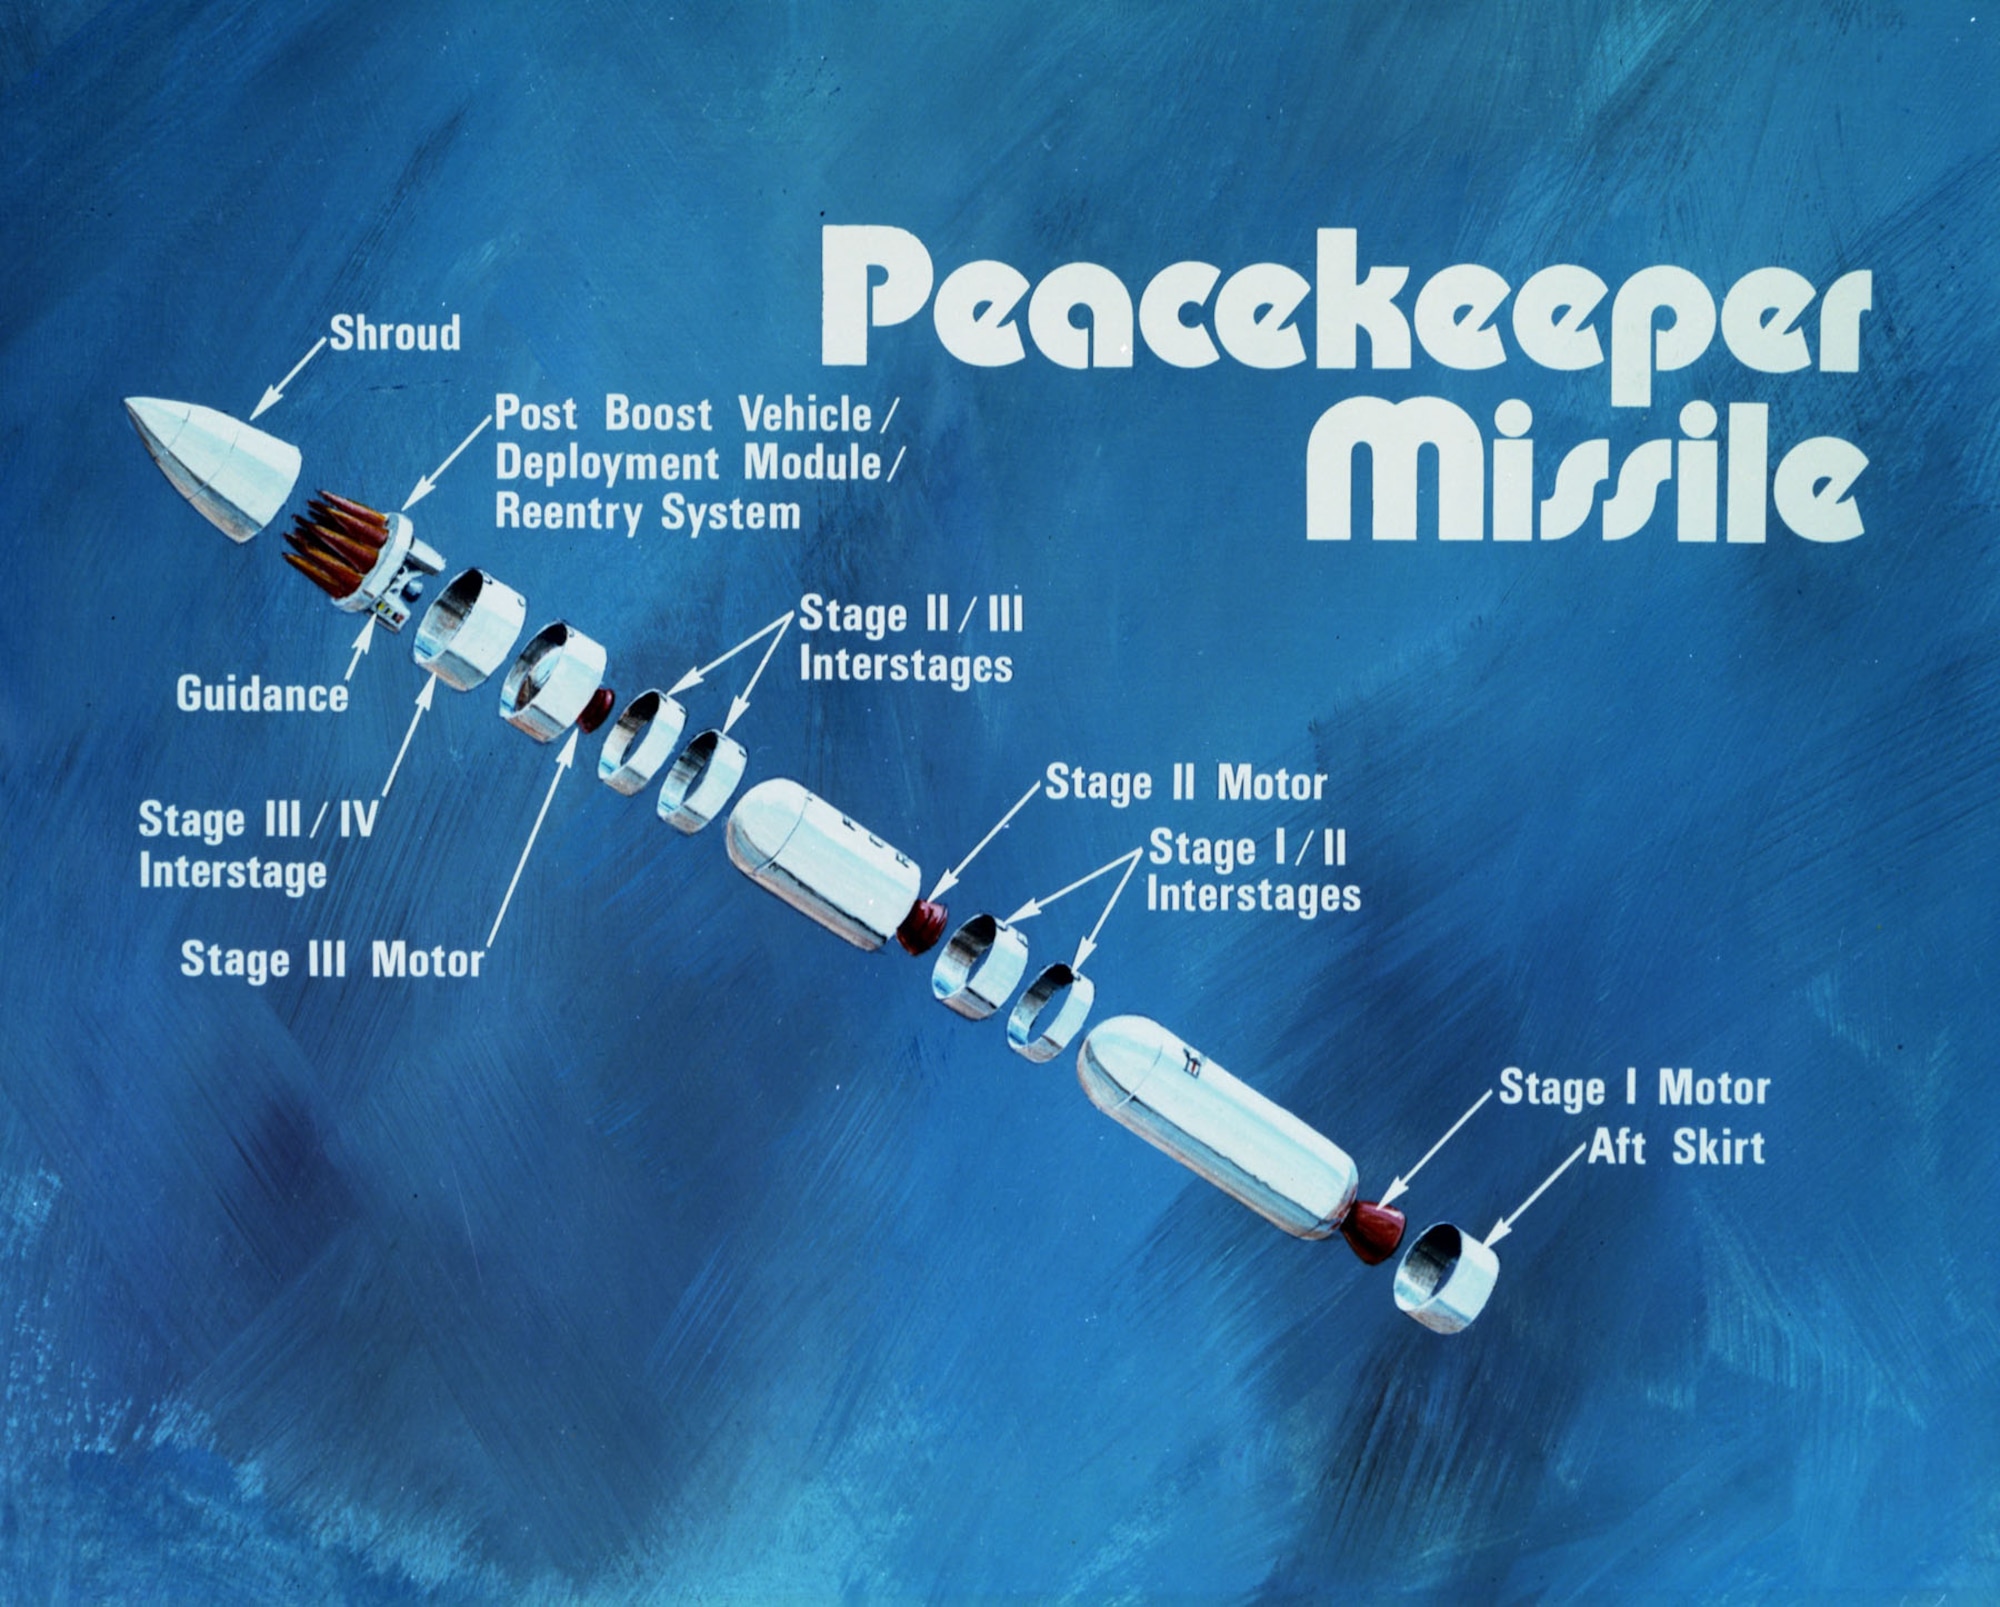 Illustration from the 1980s showing the elements of a Peacekeeper missile. (U.S. Air Force photo)